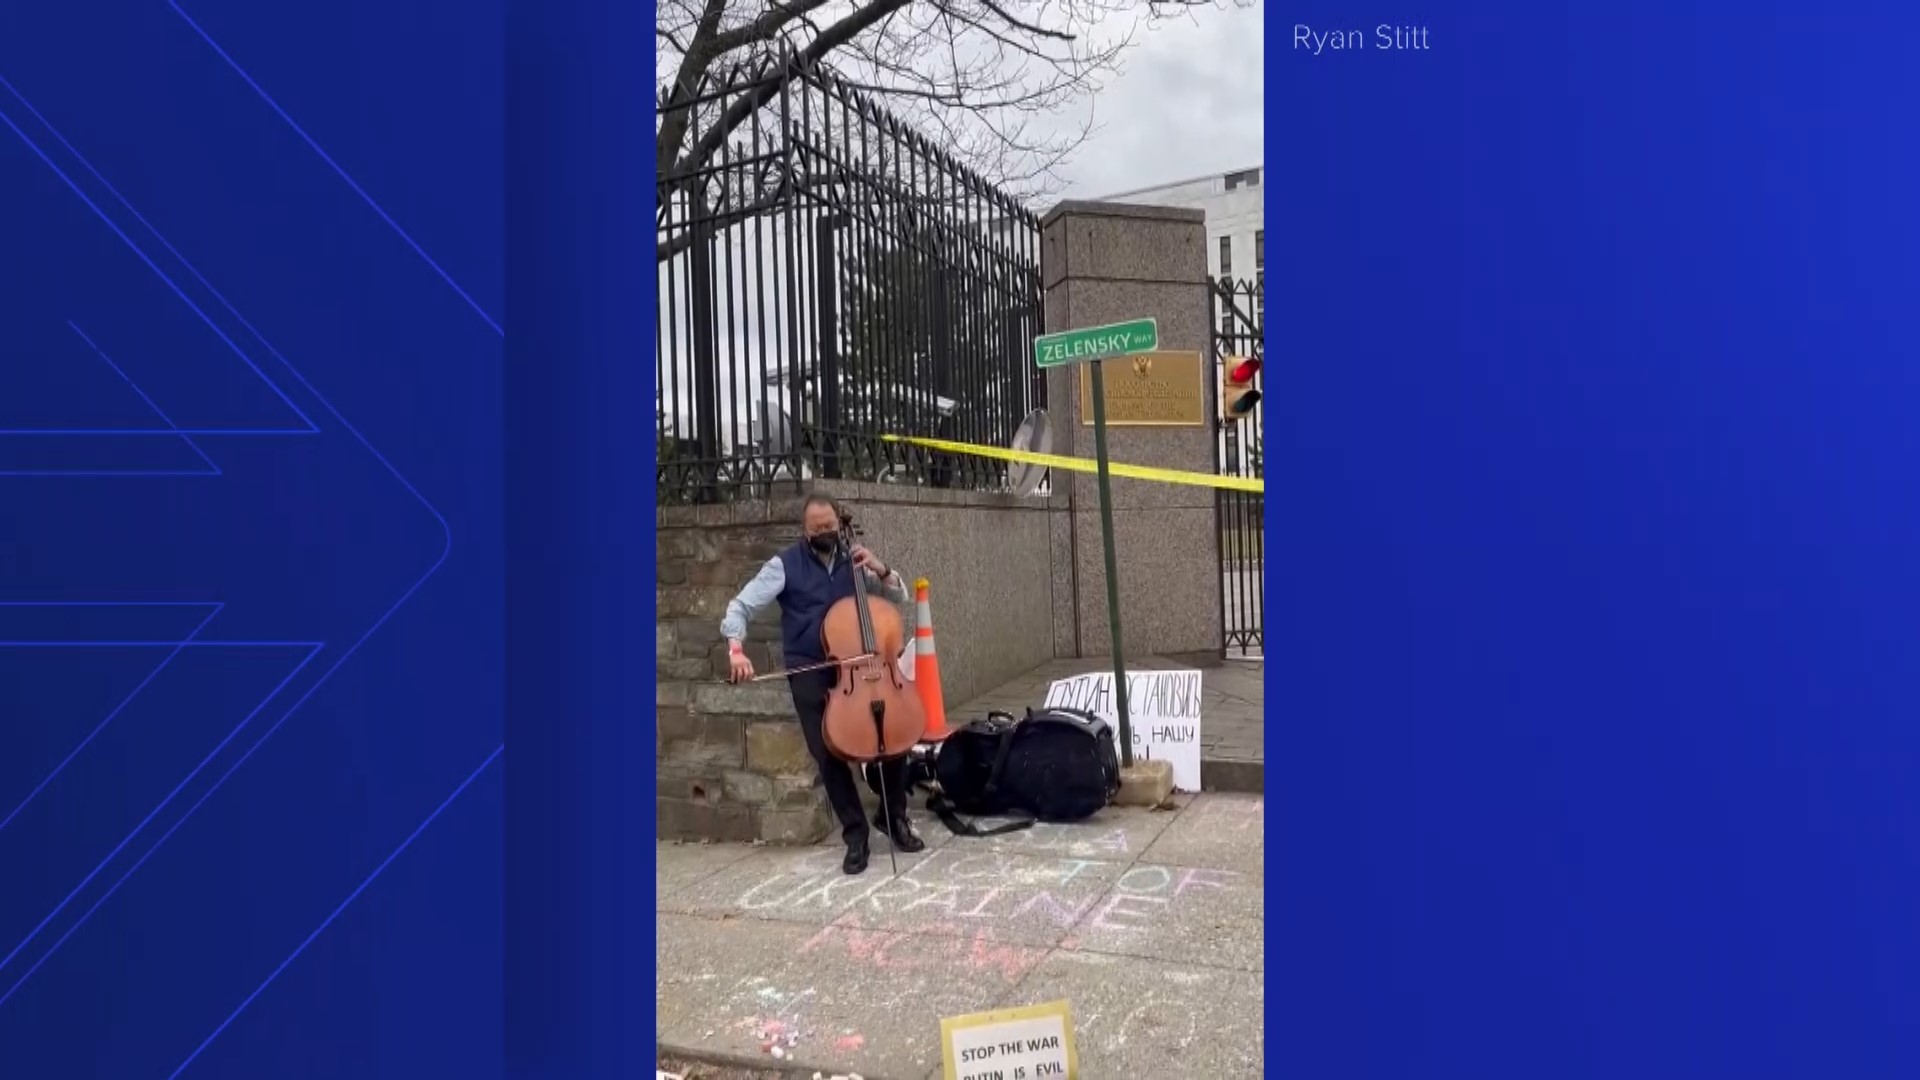 The world-famous cellist was spotted by a passerby who recorded this video. Courtesy: Ryan Stitt